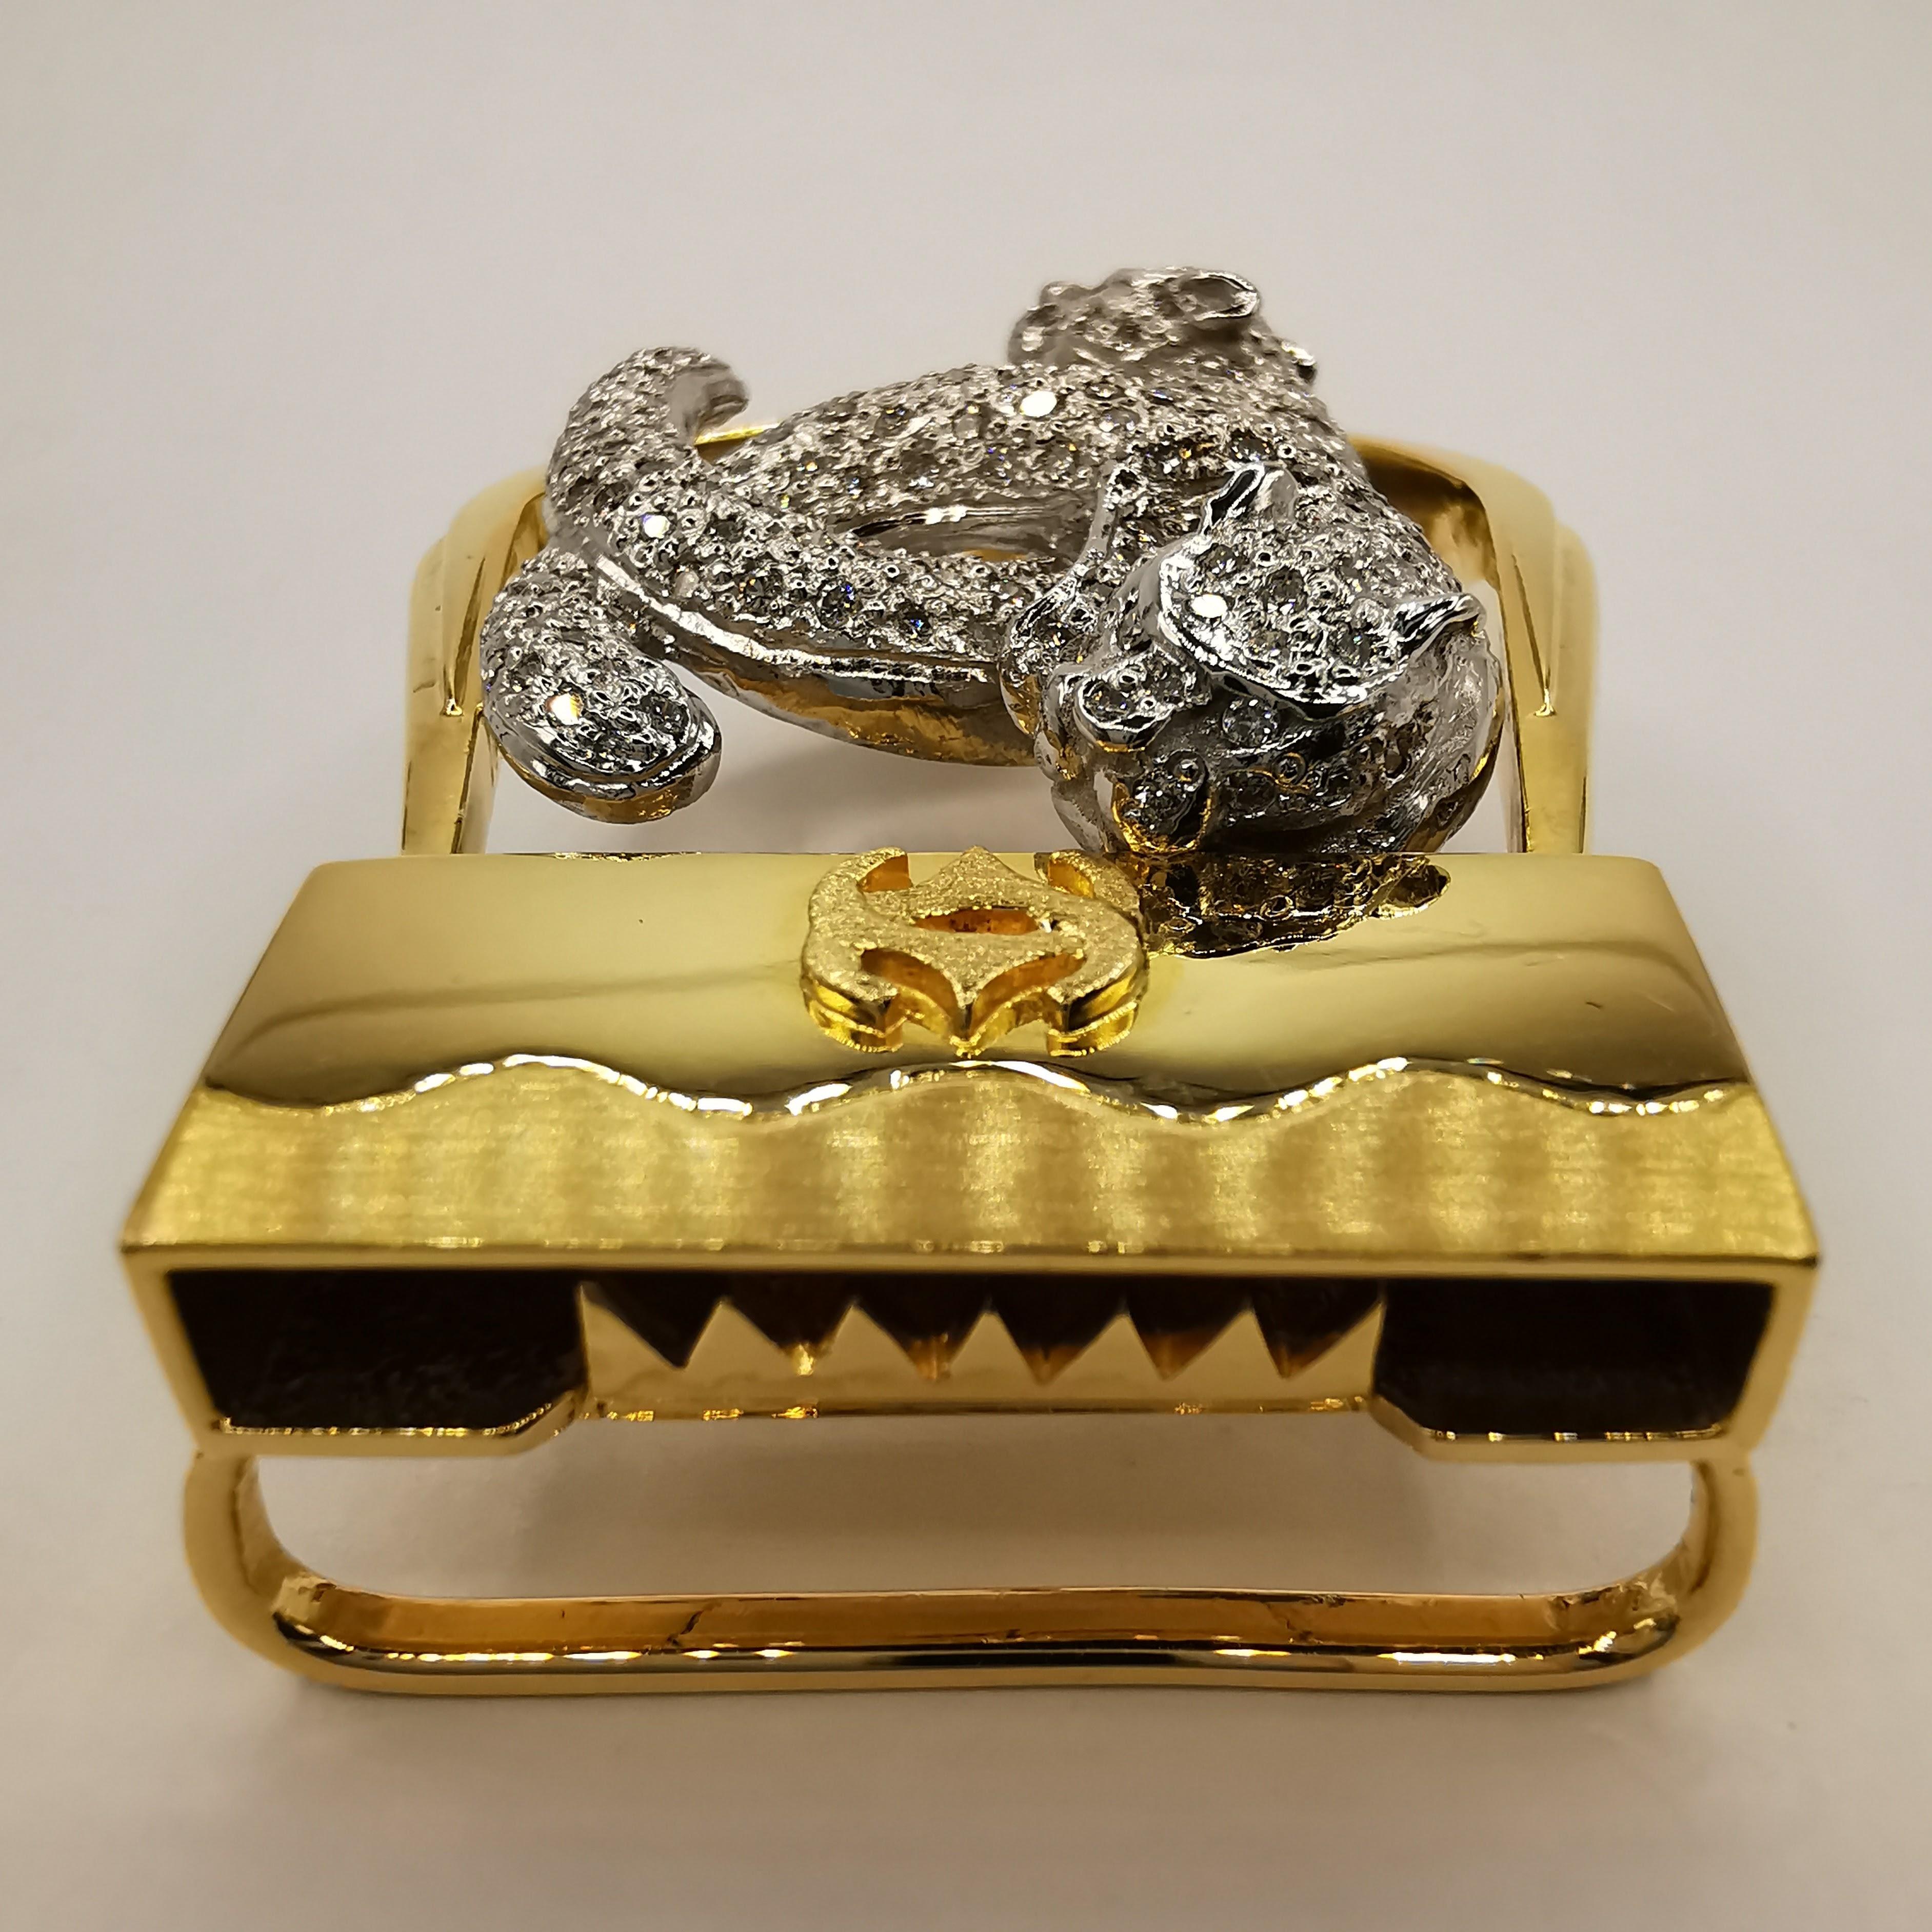 Contemporary Double Jaguar 1.74 Carat Diamond Belt Buckle in 18k Yellow and White Gold For Sale